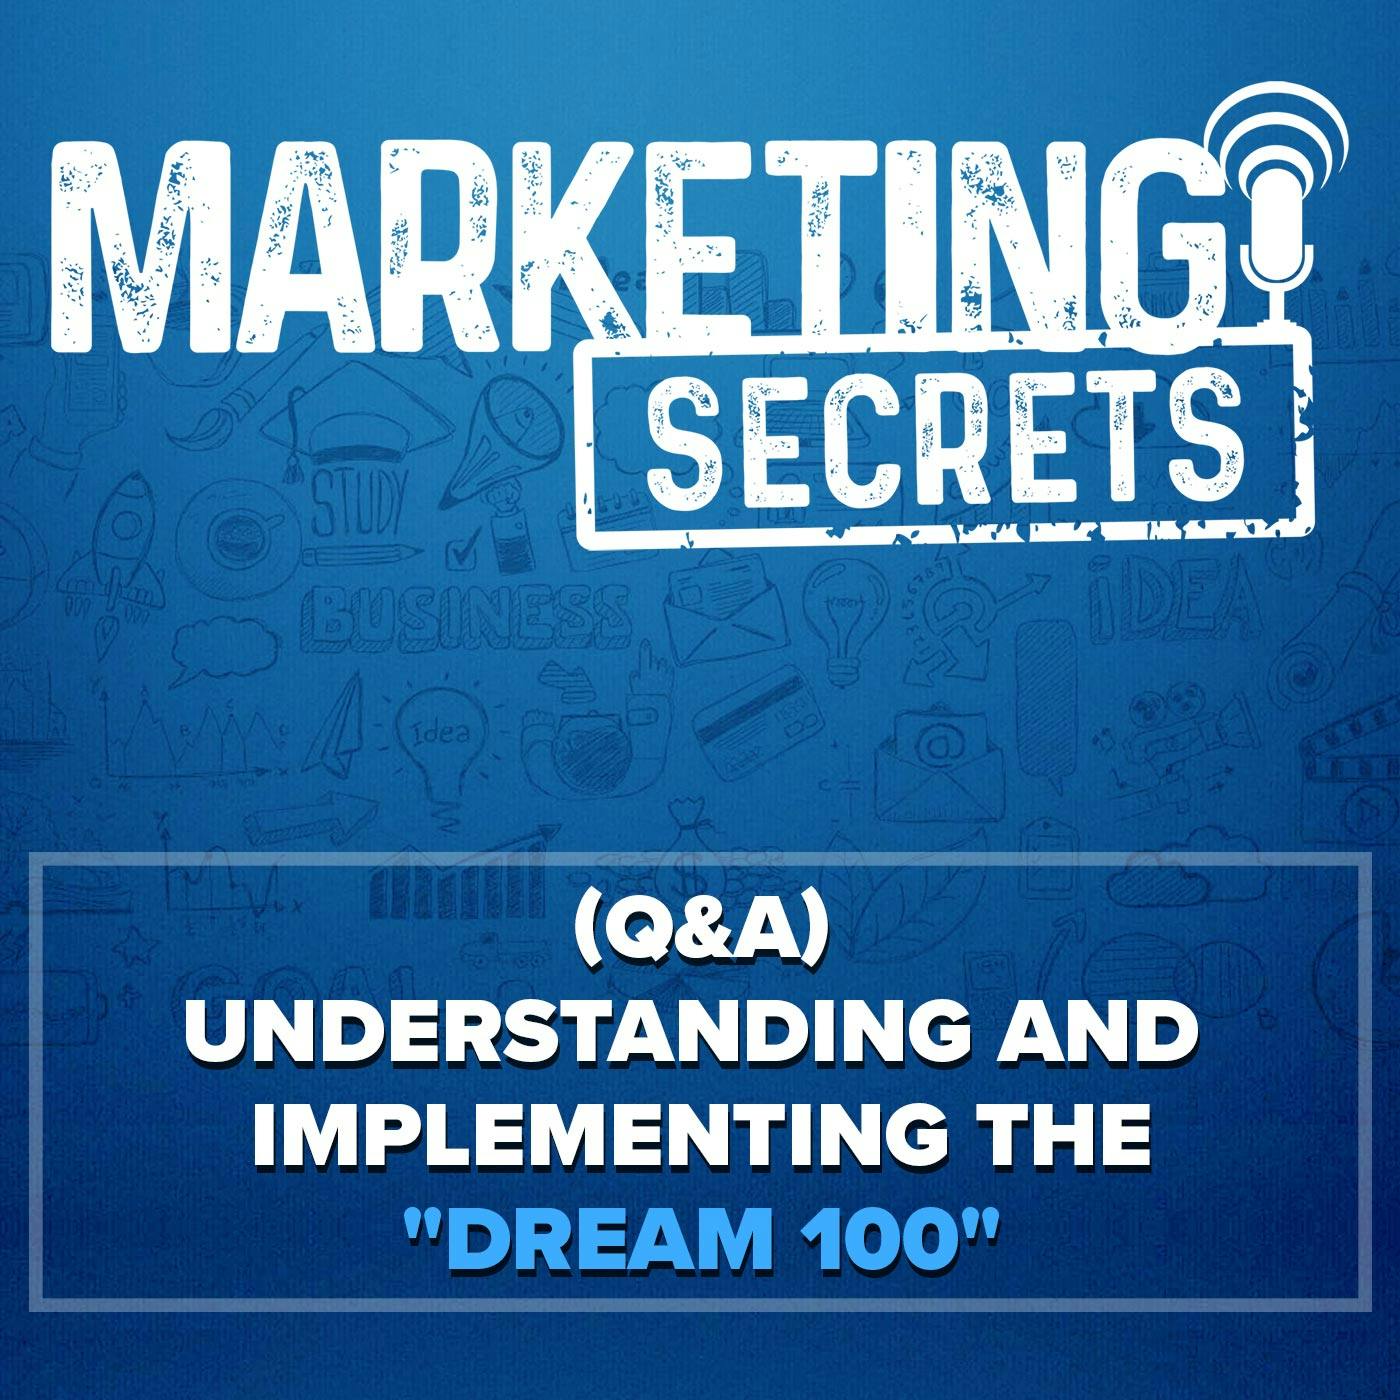 (Q&A) Understanding and Implementing the "Dream 100"